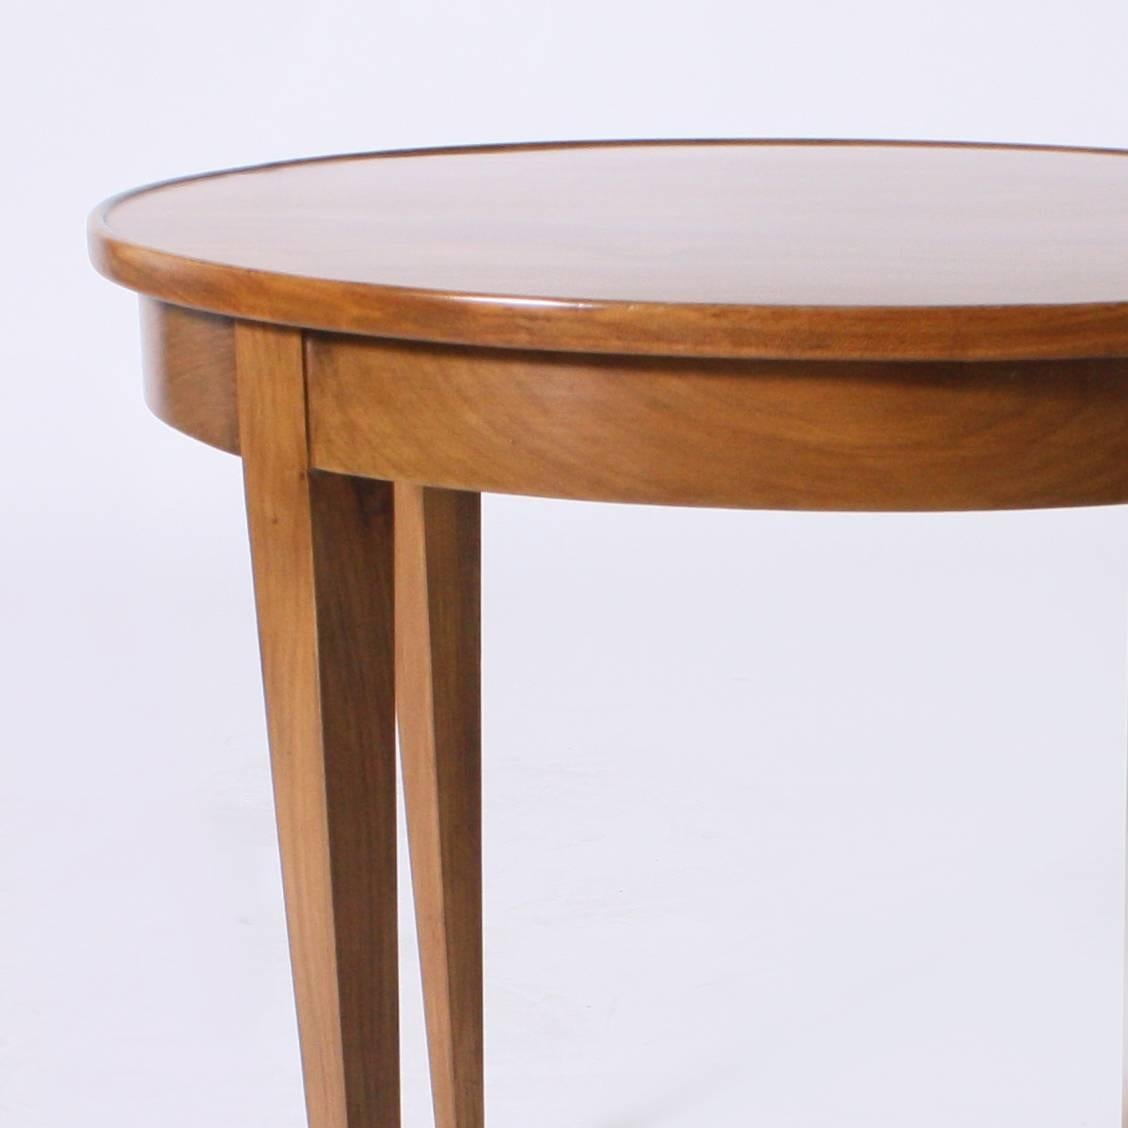 This French small round cigarette table with brass sabots has been beautifully restored in its original Merisier finish.